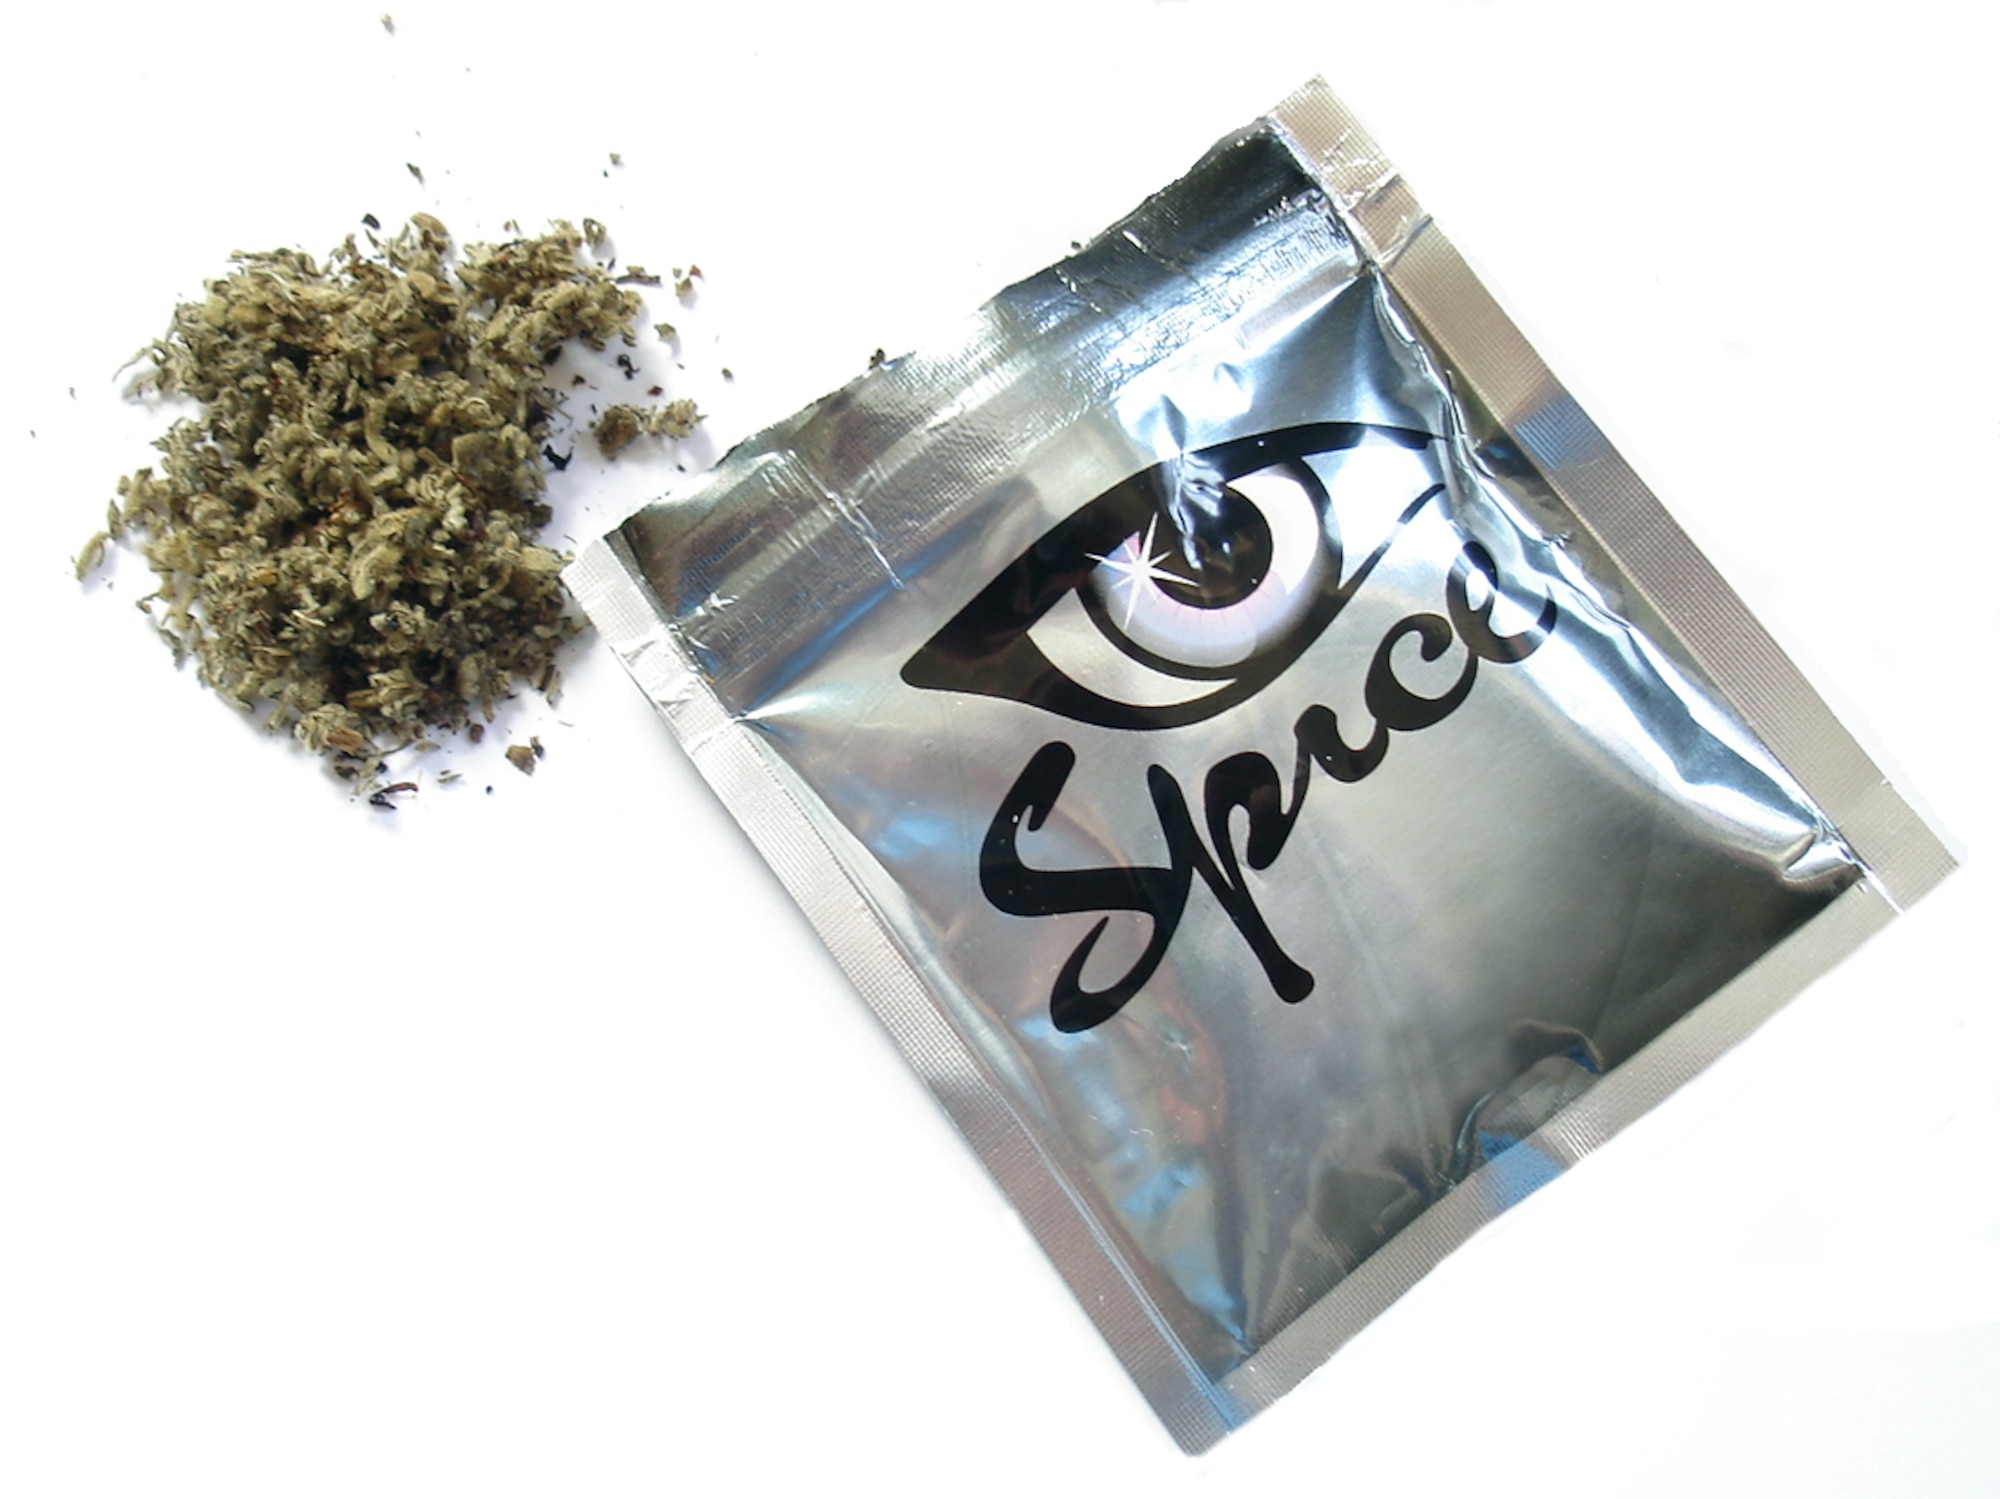 Spice is a mixture of herbs and synthetic cannabinoid and has psychoactive effects. Spice is often advertised as “incense.” Recent testing by the Drug Enforcement Agency revealed that the psychoactive effects in Spice are caused by the chemically manufactured tetrahydrocannanbinol, commonly known as THC, and could be hundreds of times more potent than marijuana. The use of or possession of Spice is prohibited in the Air Force and Airmen caught with this substance will face punitive action.(Courtesy photo illustration)